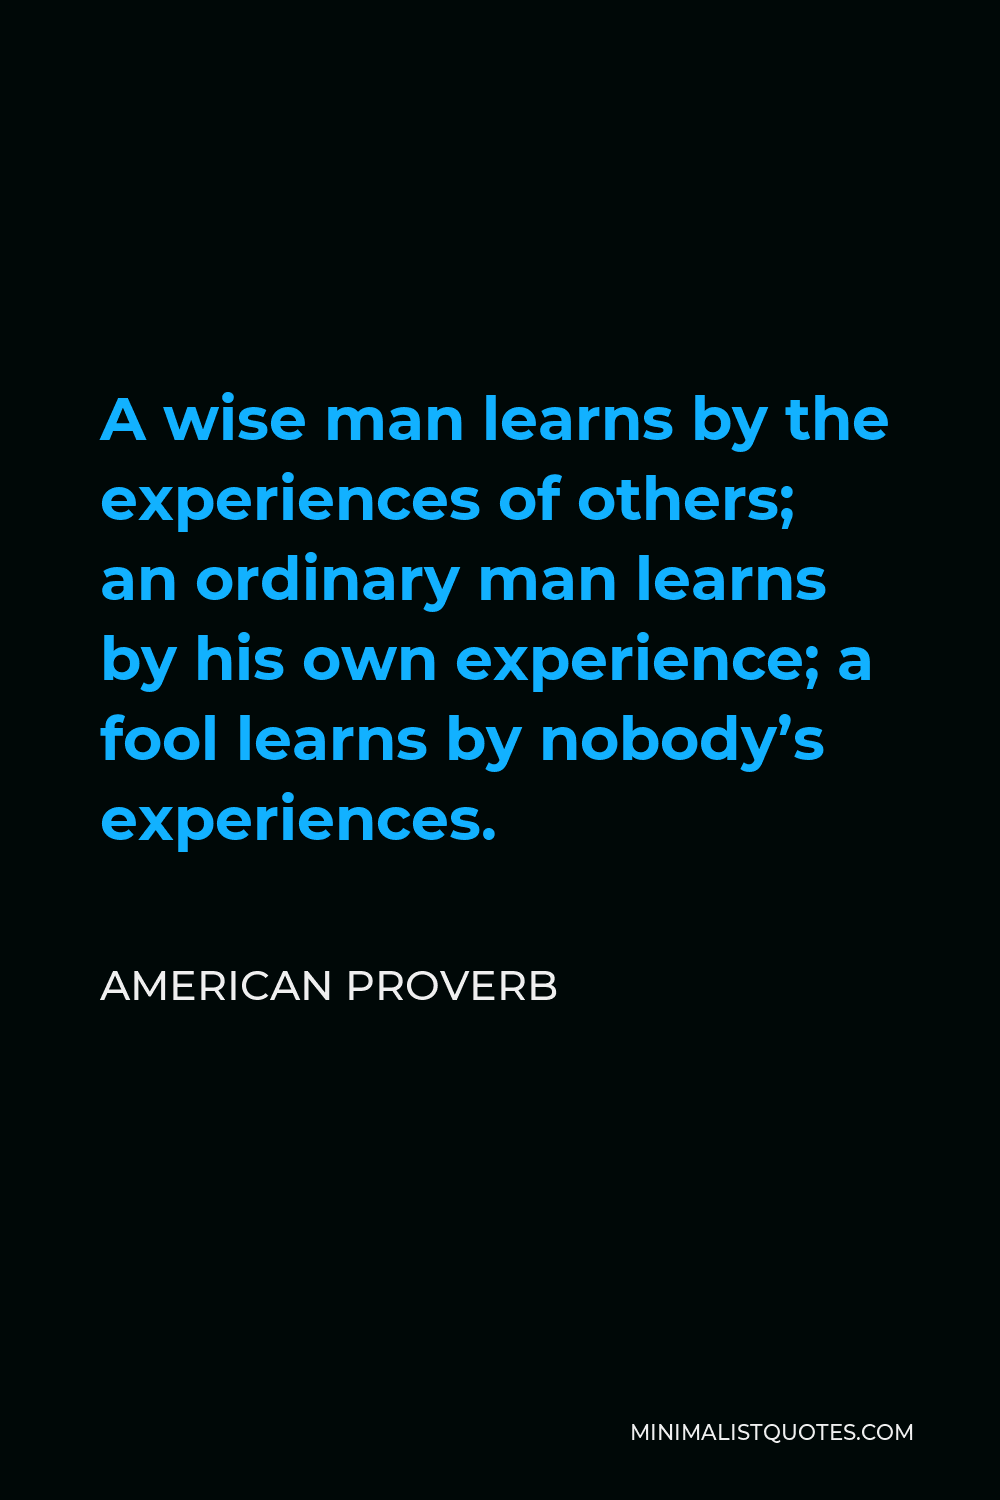 American Proverb Quote - A wise man learns by the experiences of others; an ordinary man learns by his own experience; a fool learns by nobody’s experiences.